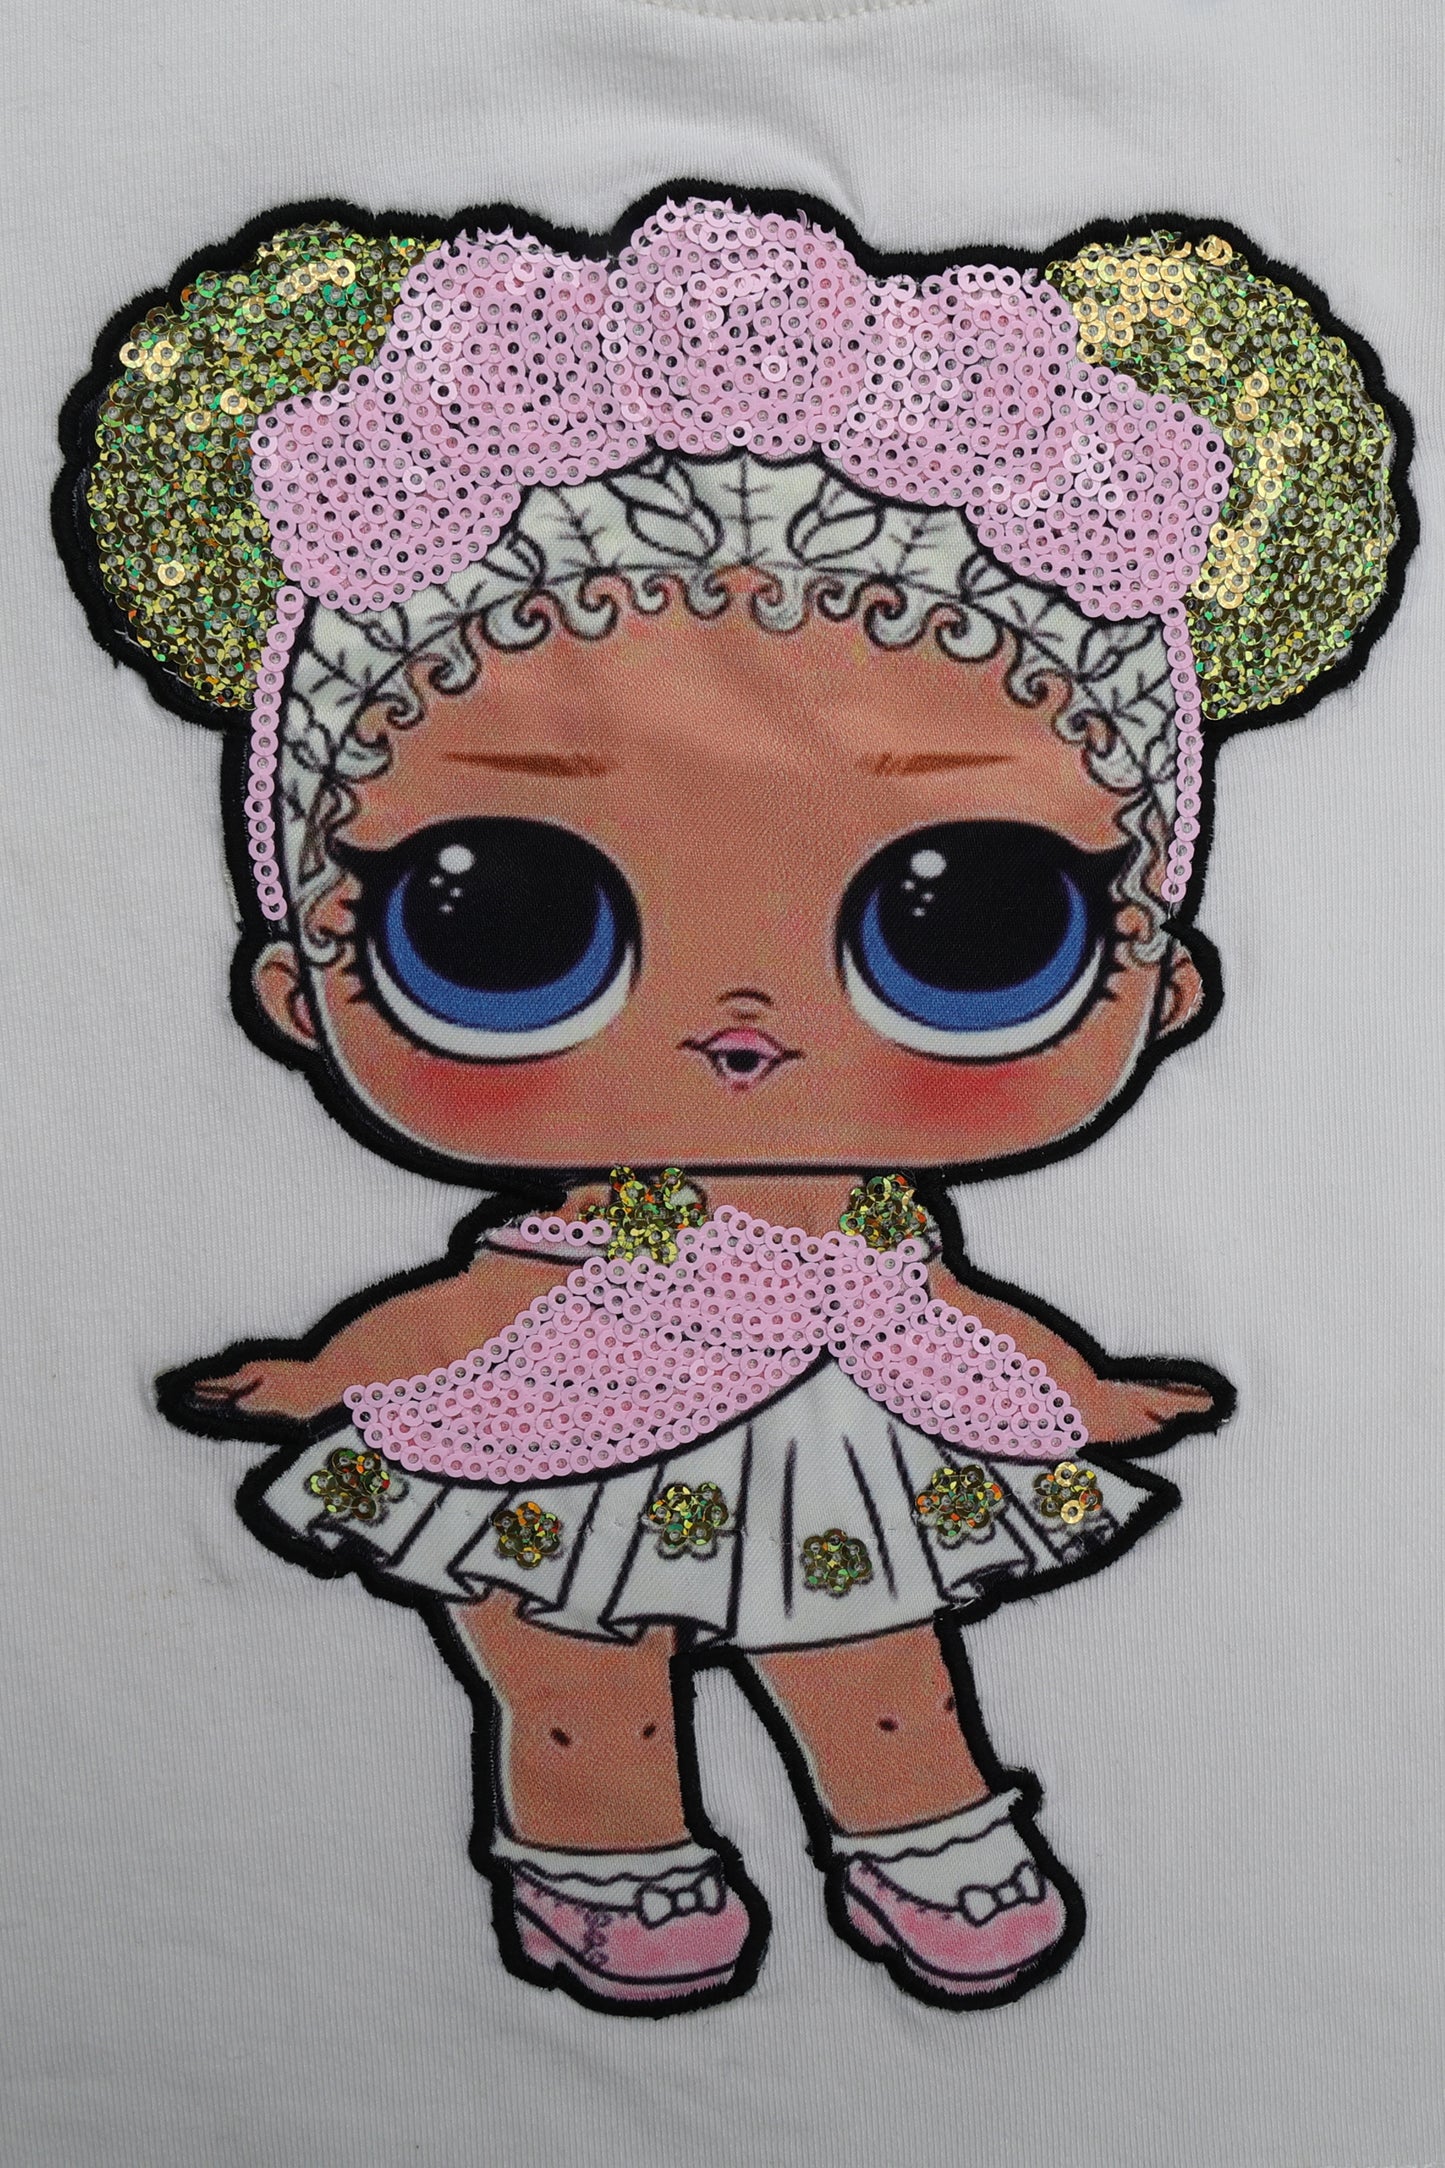 Half Sleeve T-shirt With Doll Patch